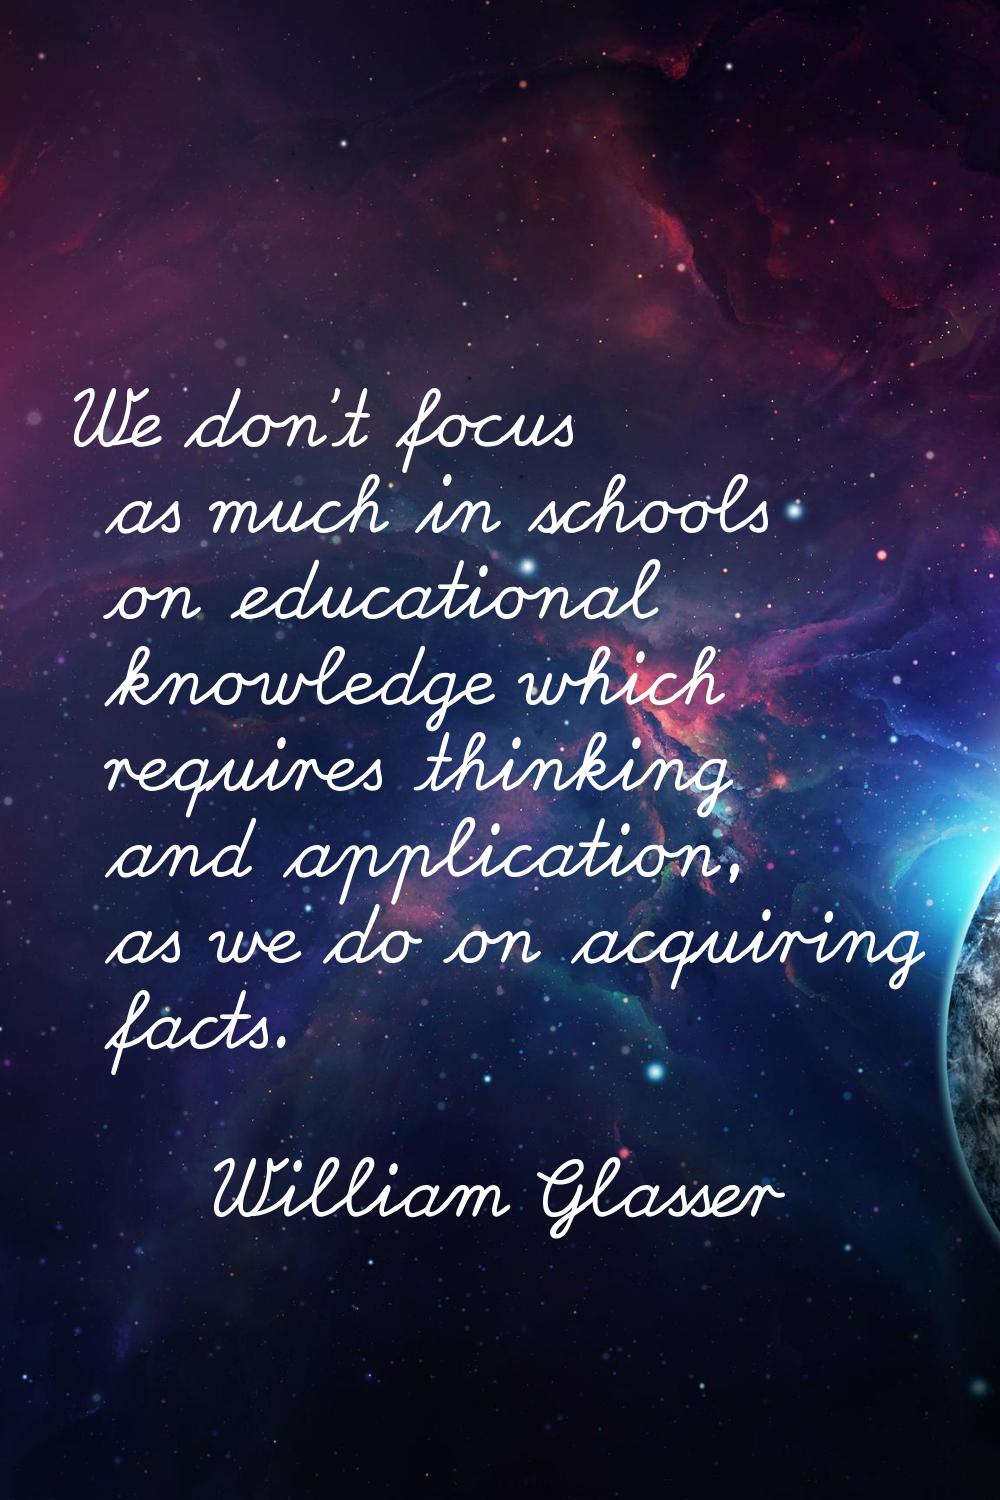 We don't focus as much in schools on educational knowledge which requires thinking and application,